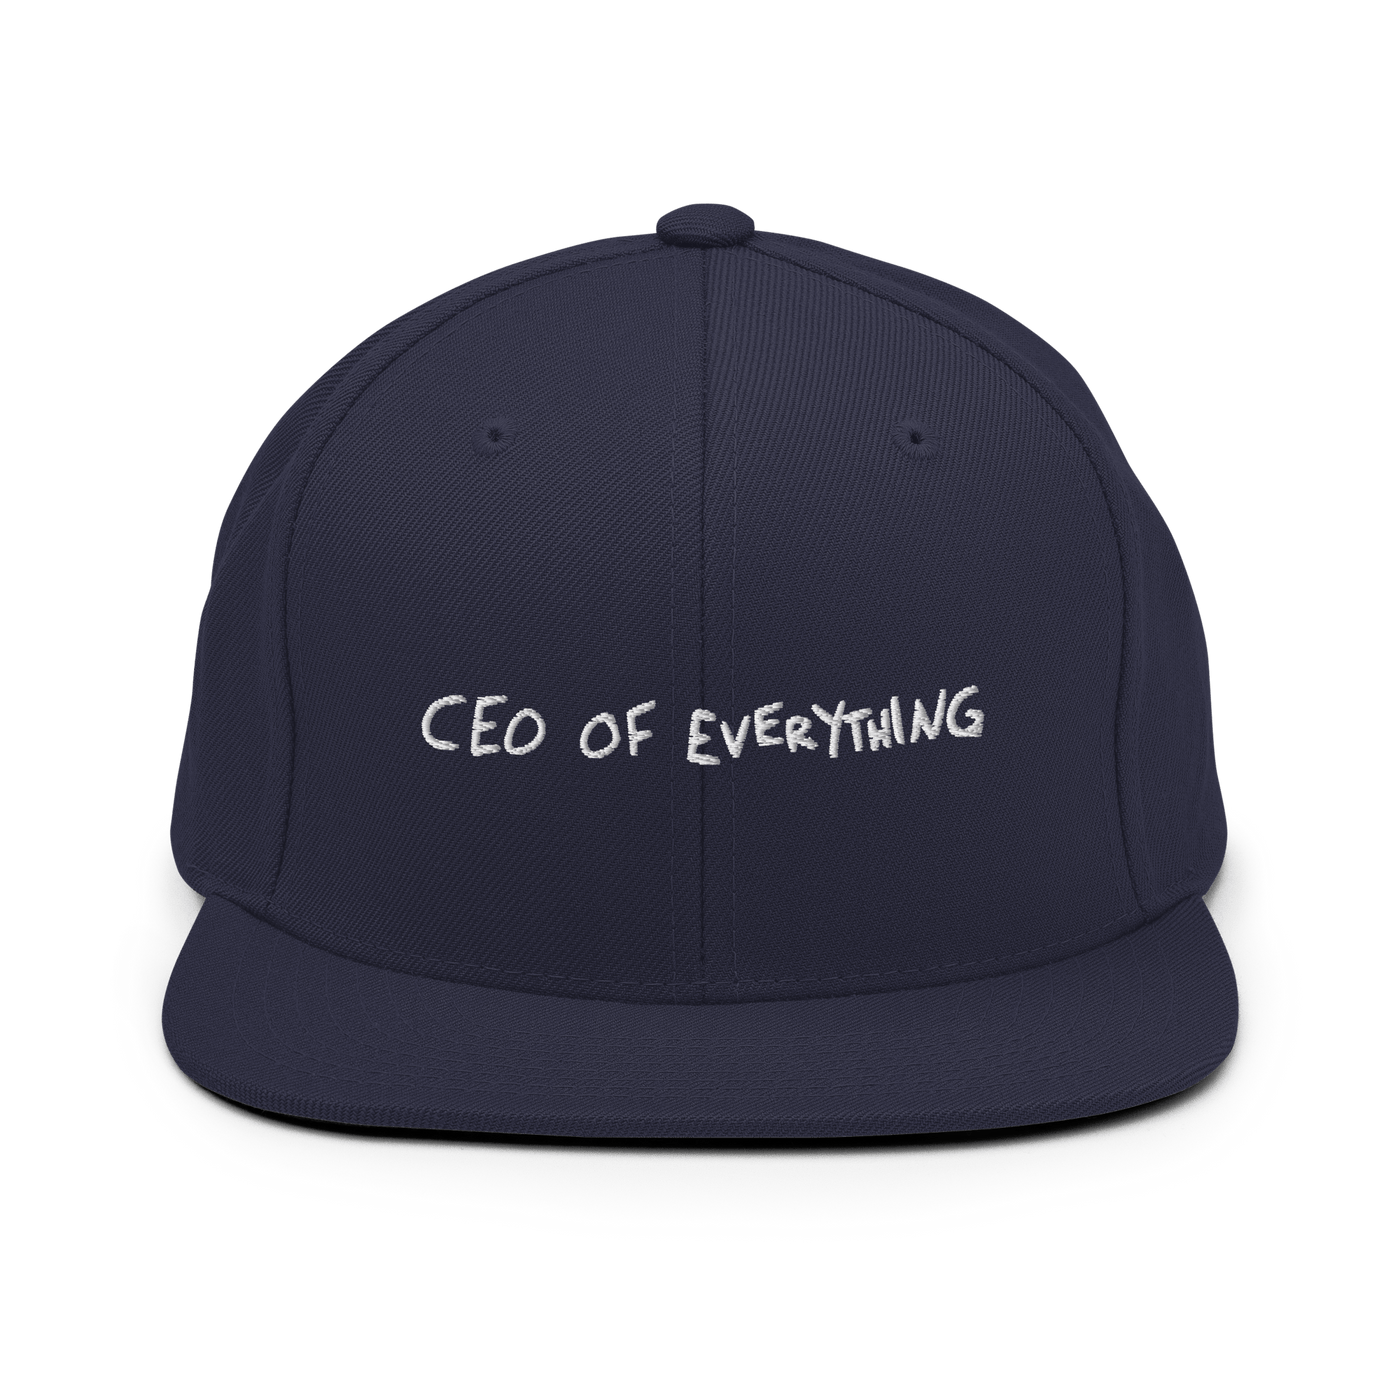 CEO of everything Snapback - Maroon - - Just Another Cap Store